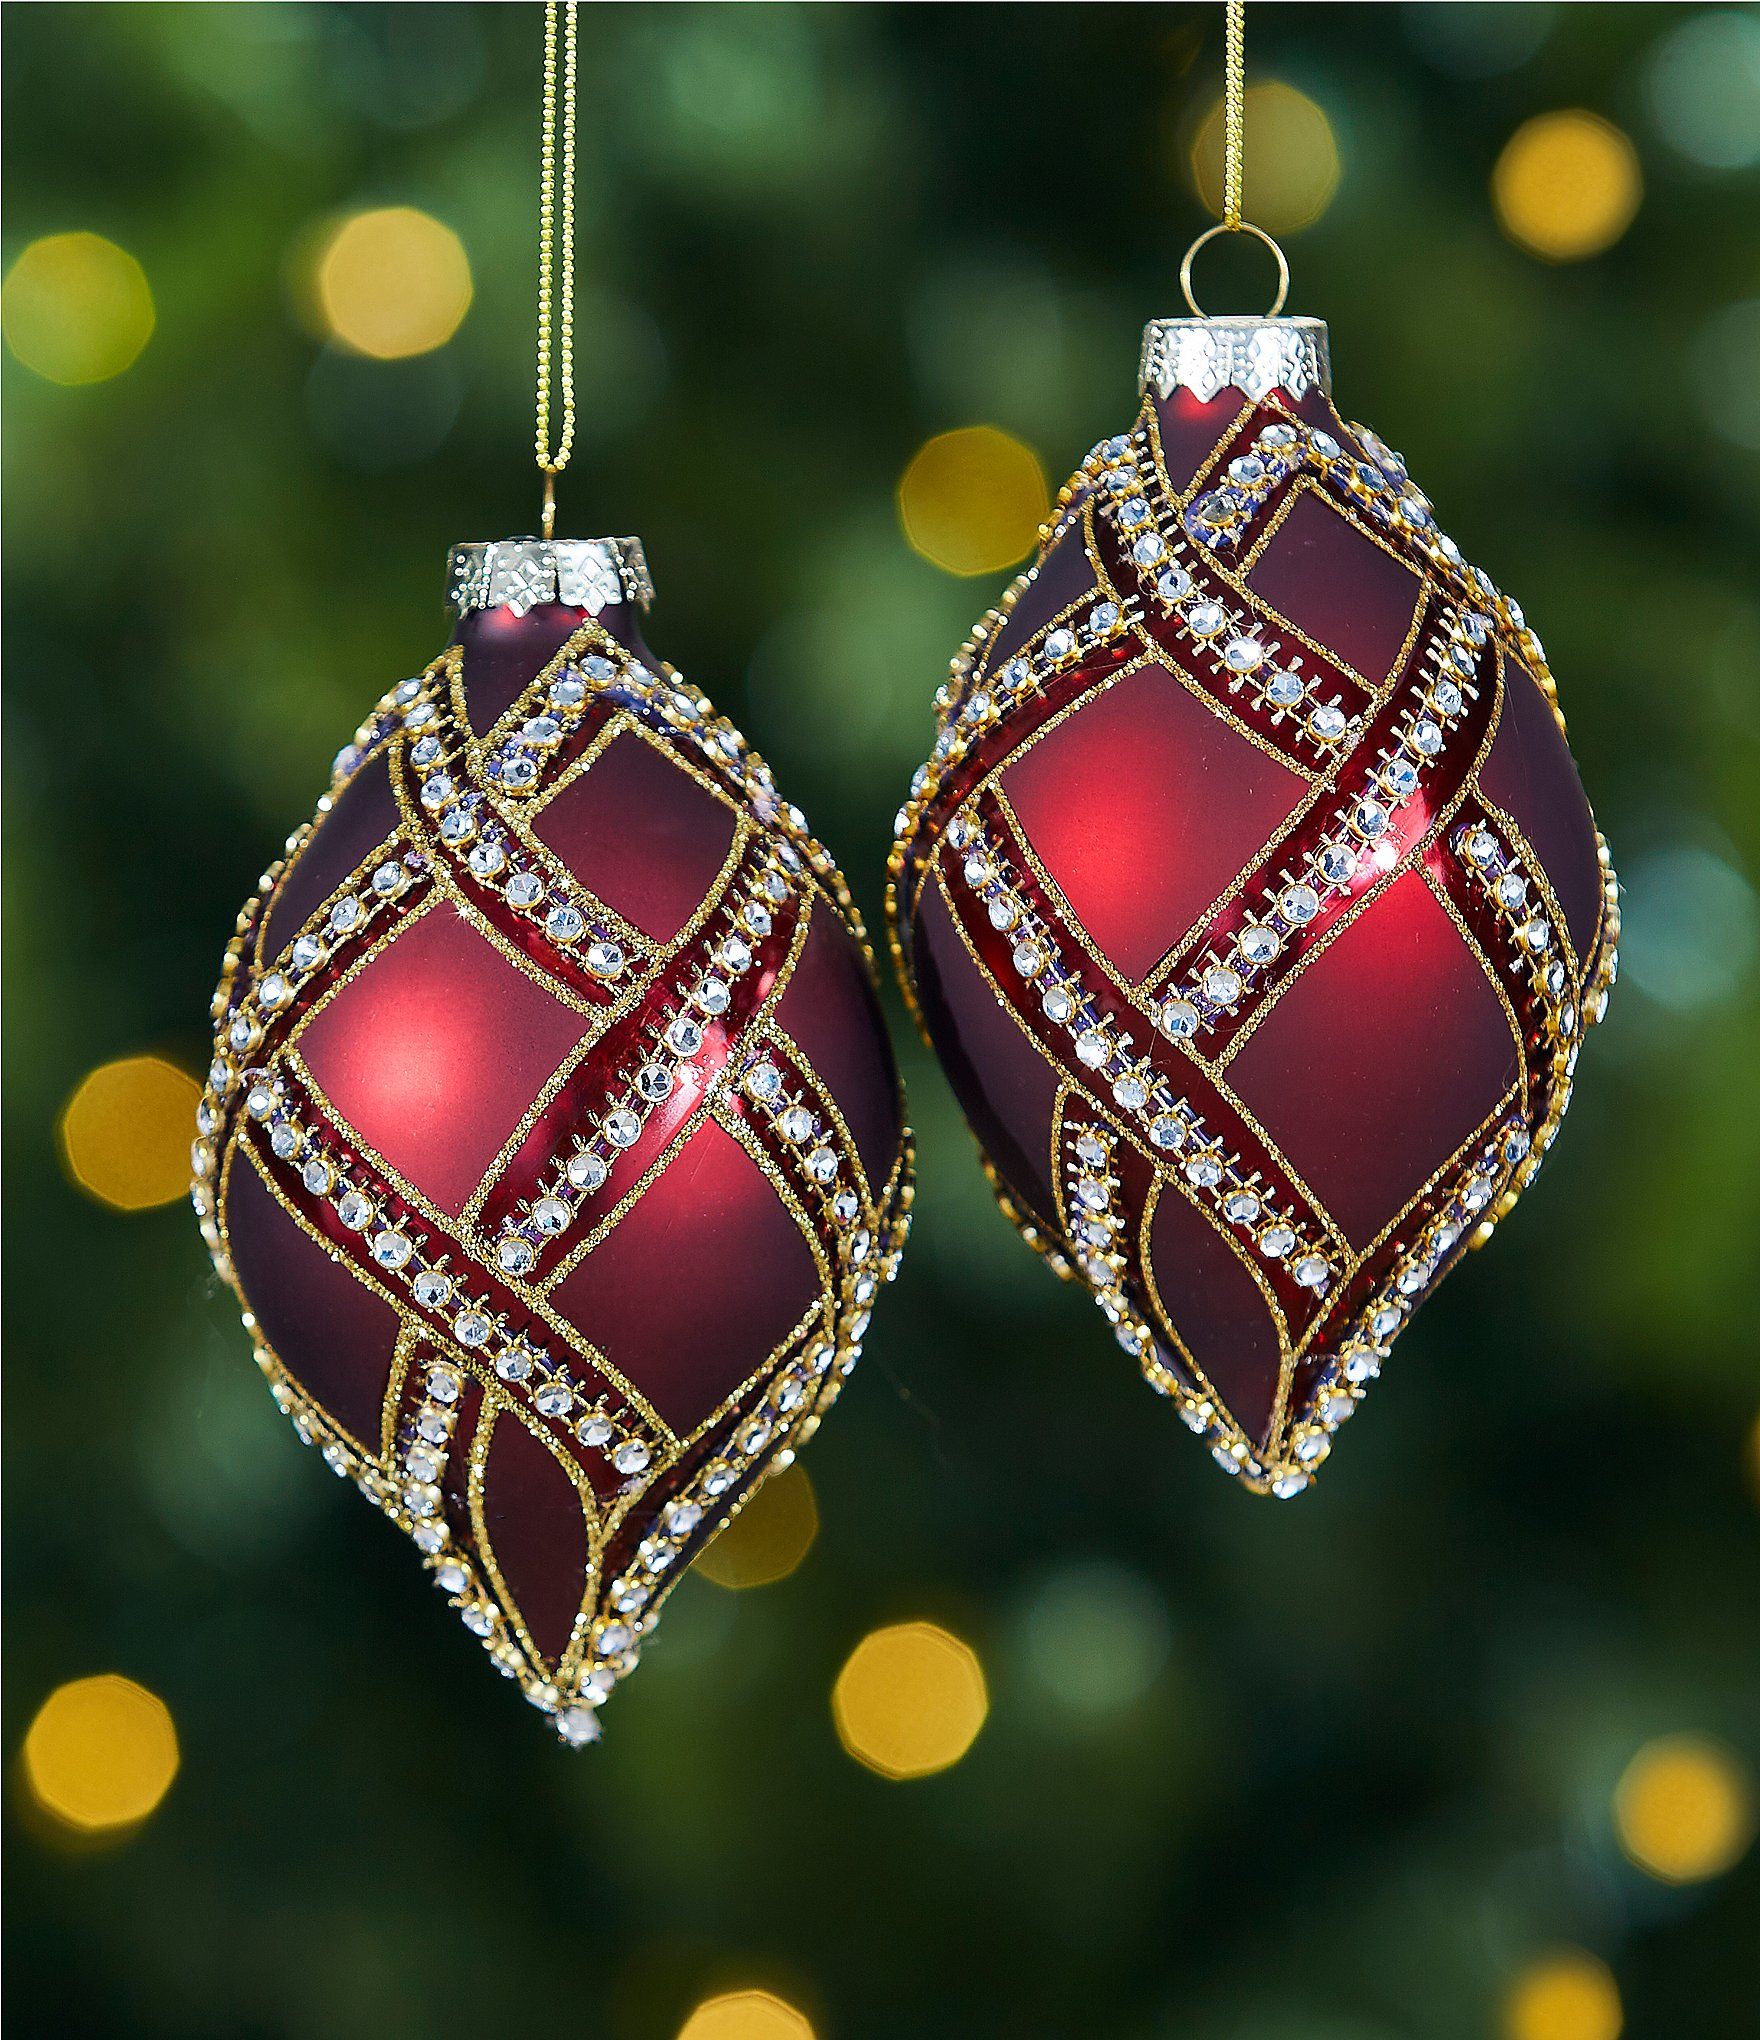 Home for the Holidays Collection Rhinestone Finial Ornament 2-Piece Set | Dillard's